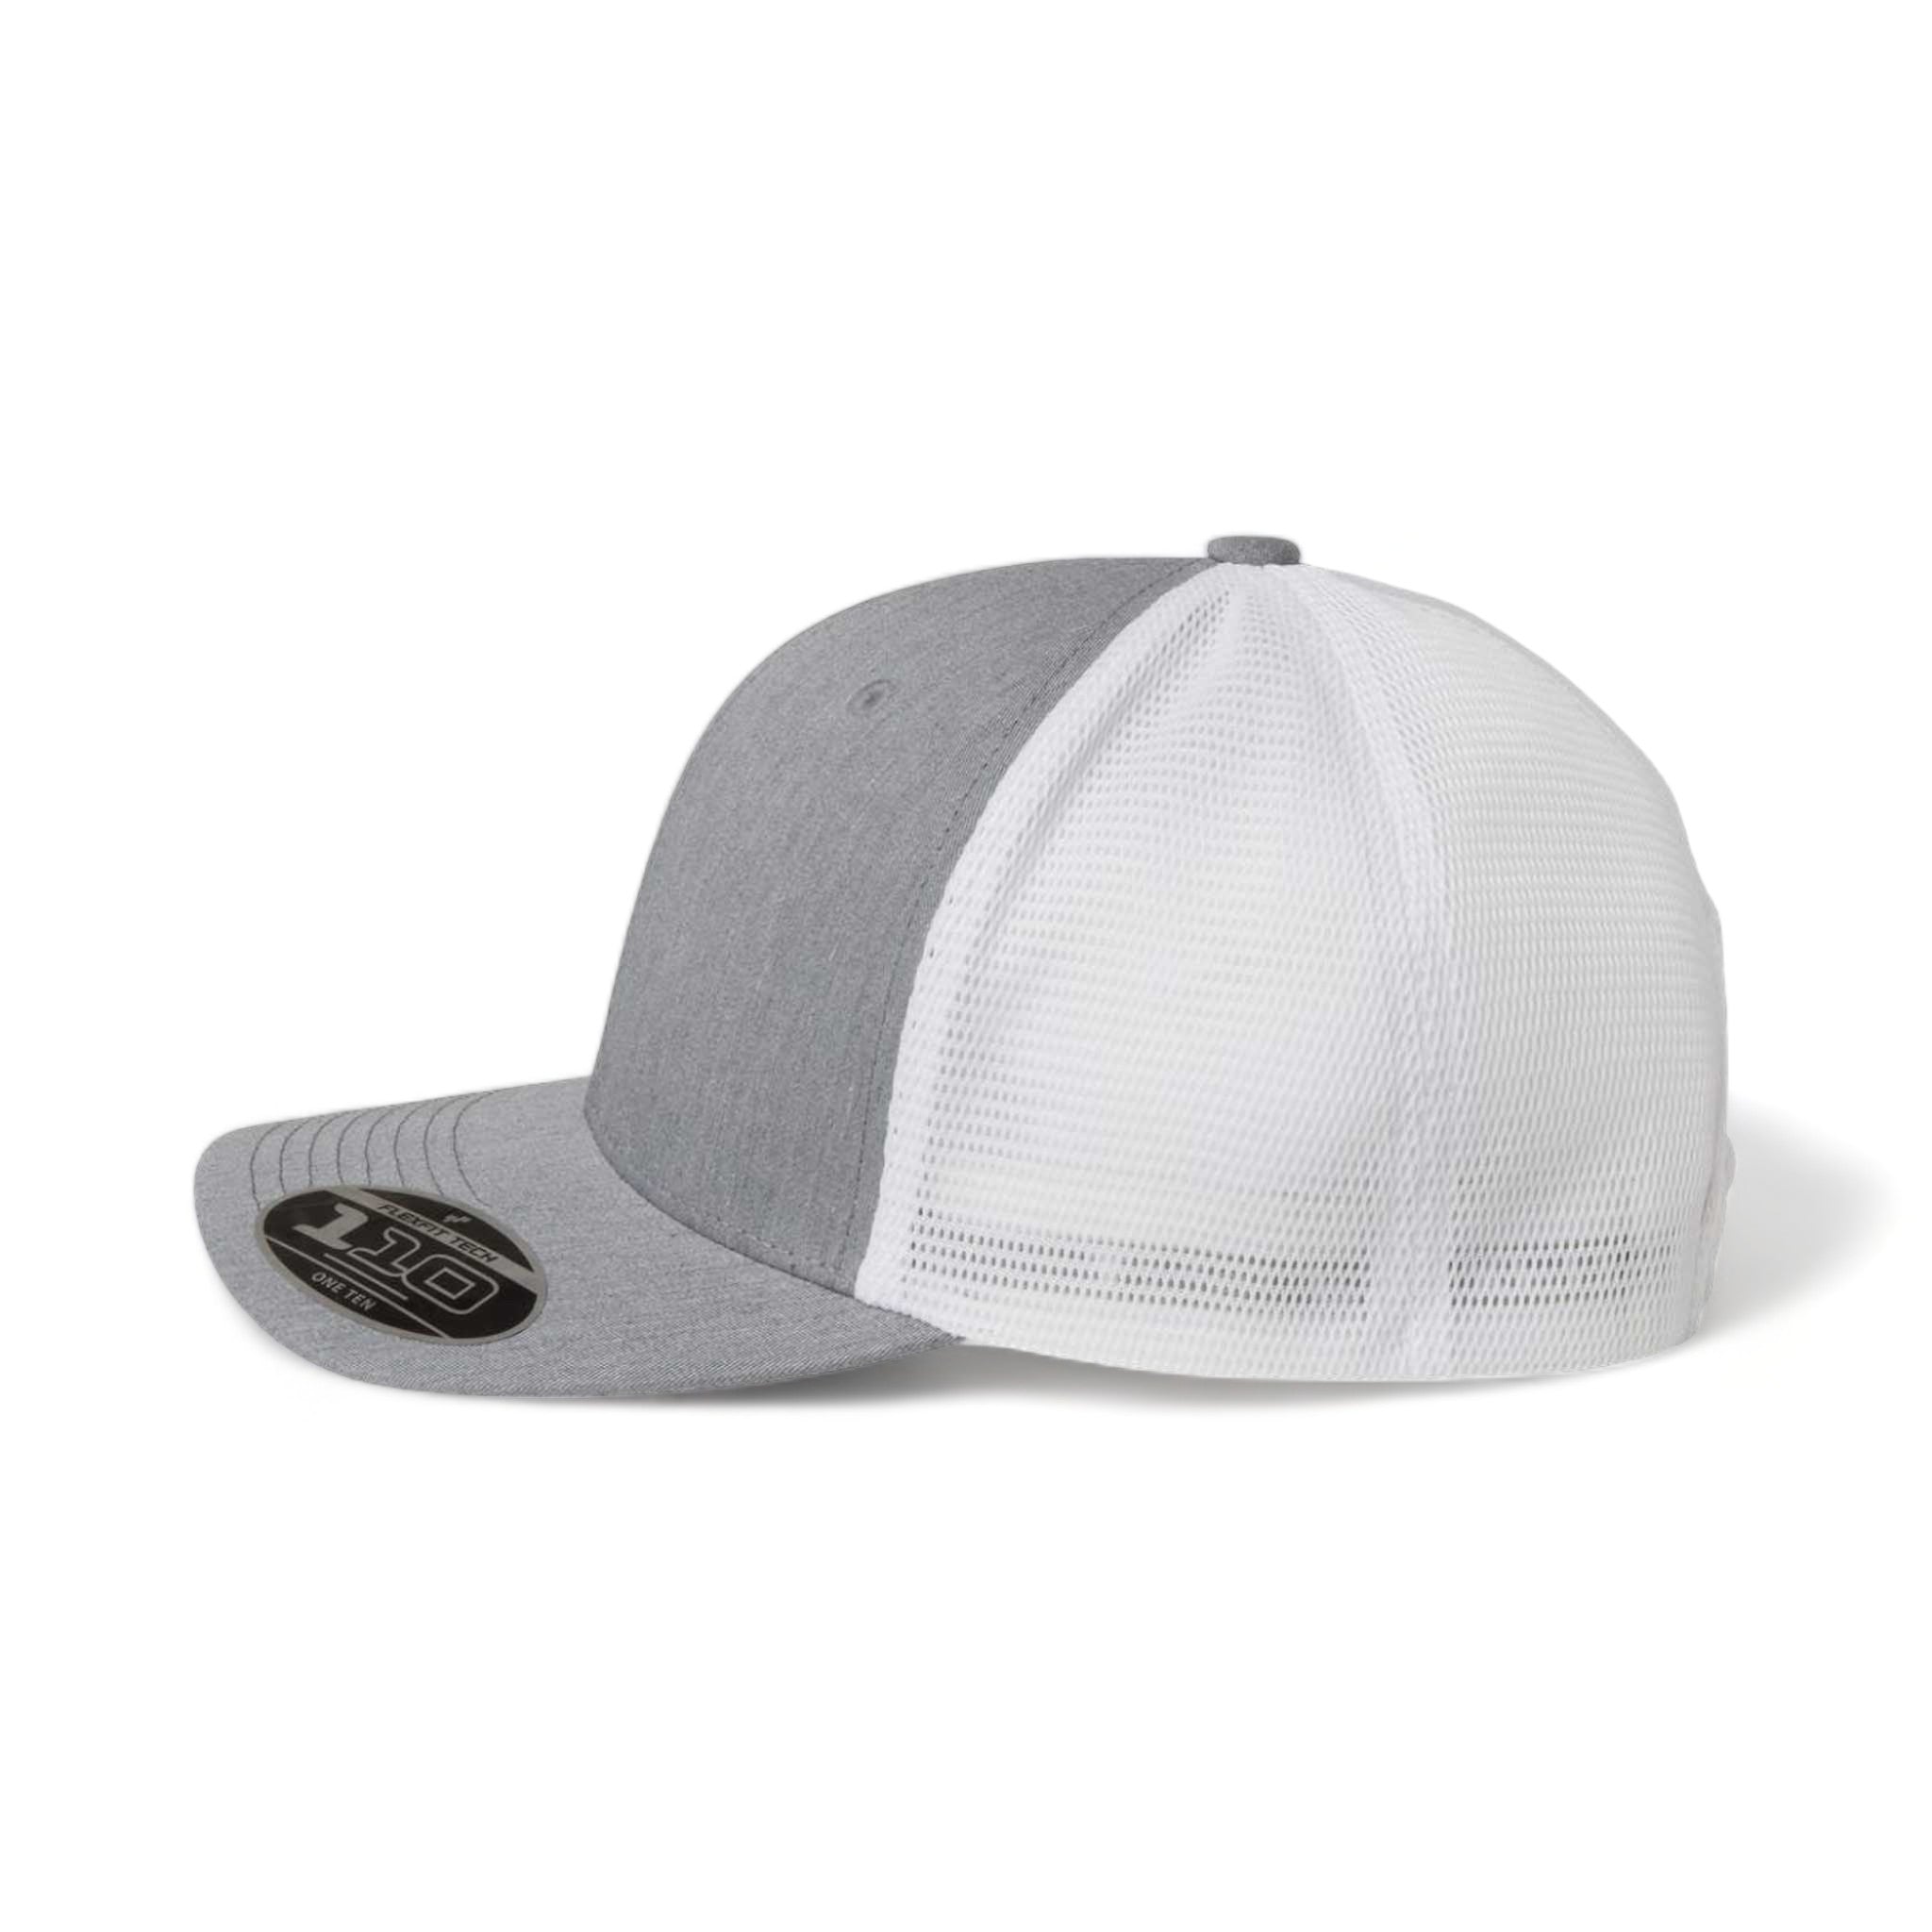 Side view of Flexfit 110M custom hat in heather grey and white